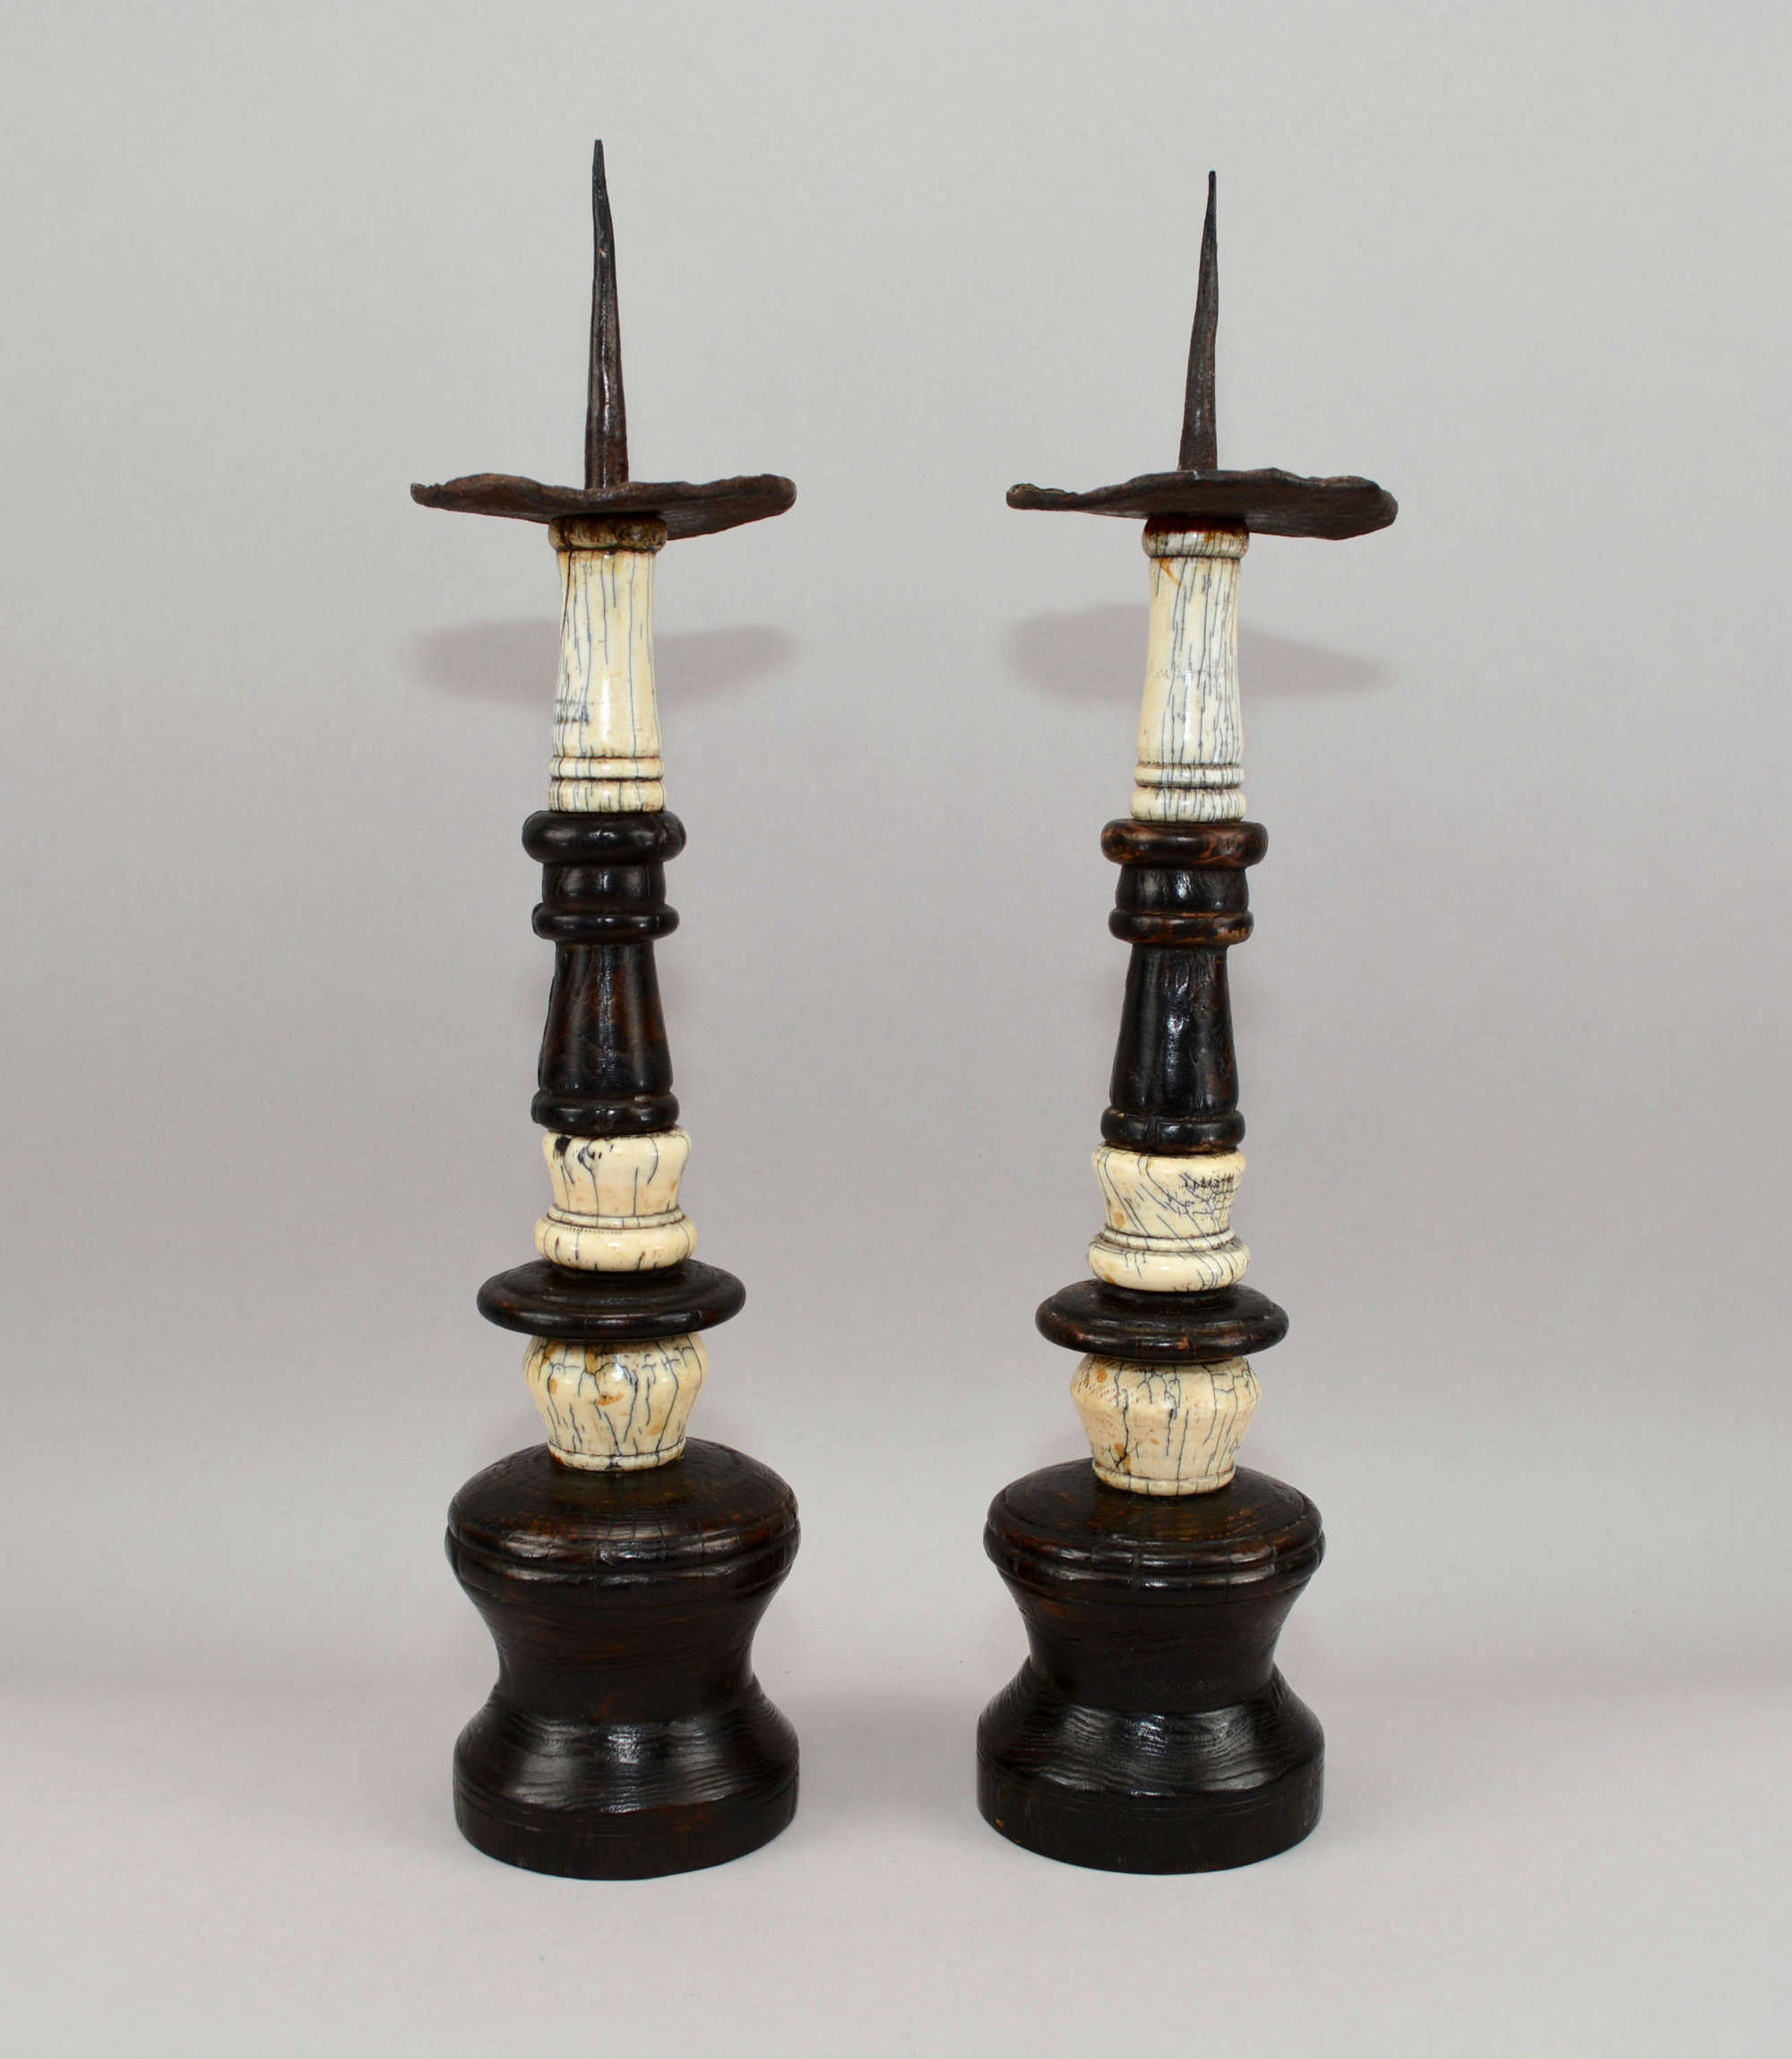 A beautiful pair of antique 18th century or earlier pricket candlestic